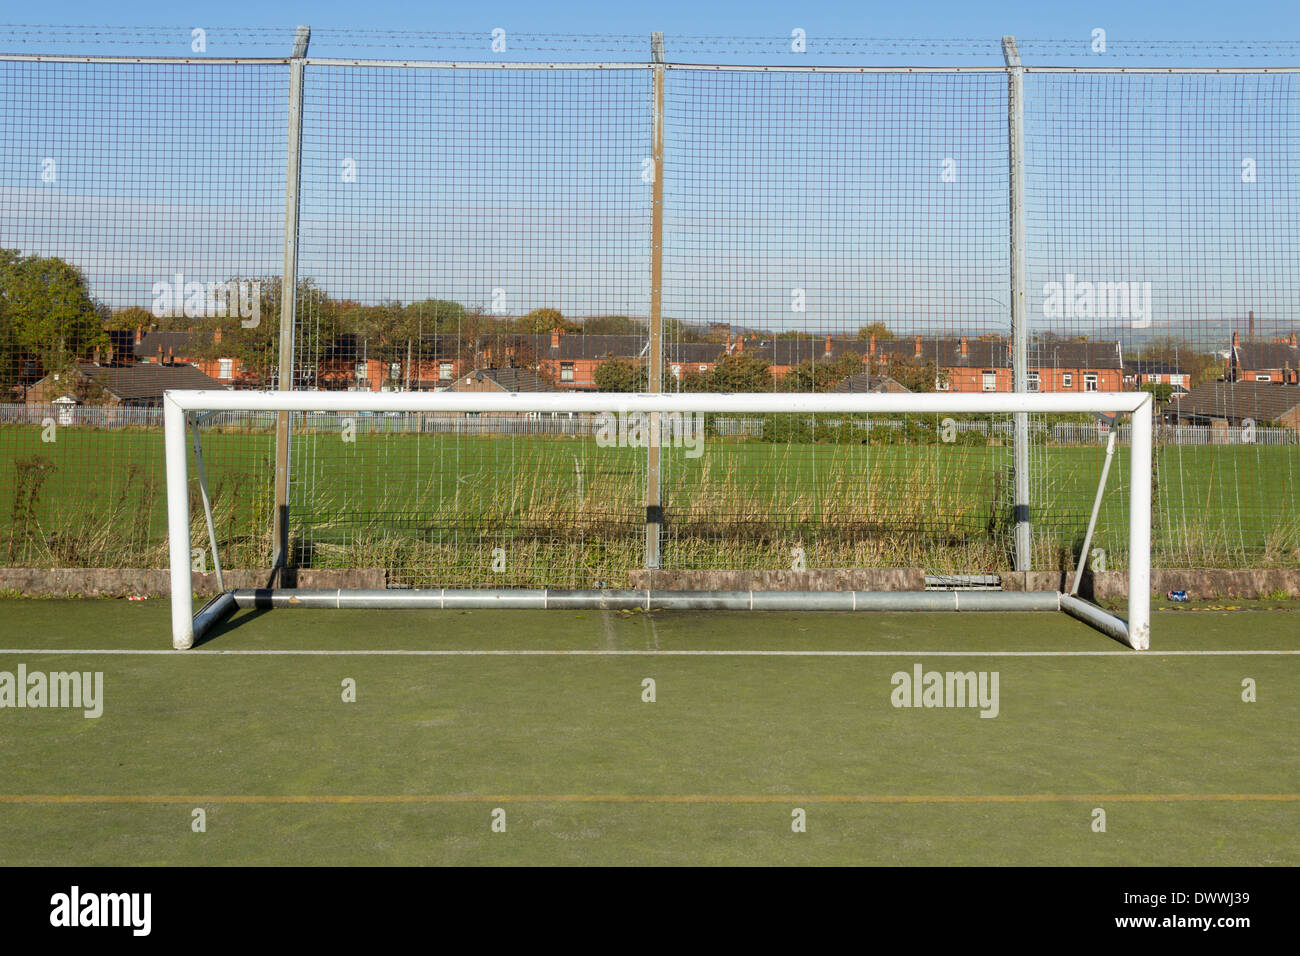 Five A Side Football Pitch High Resolution Stock Photography And Images Alamy